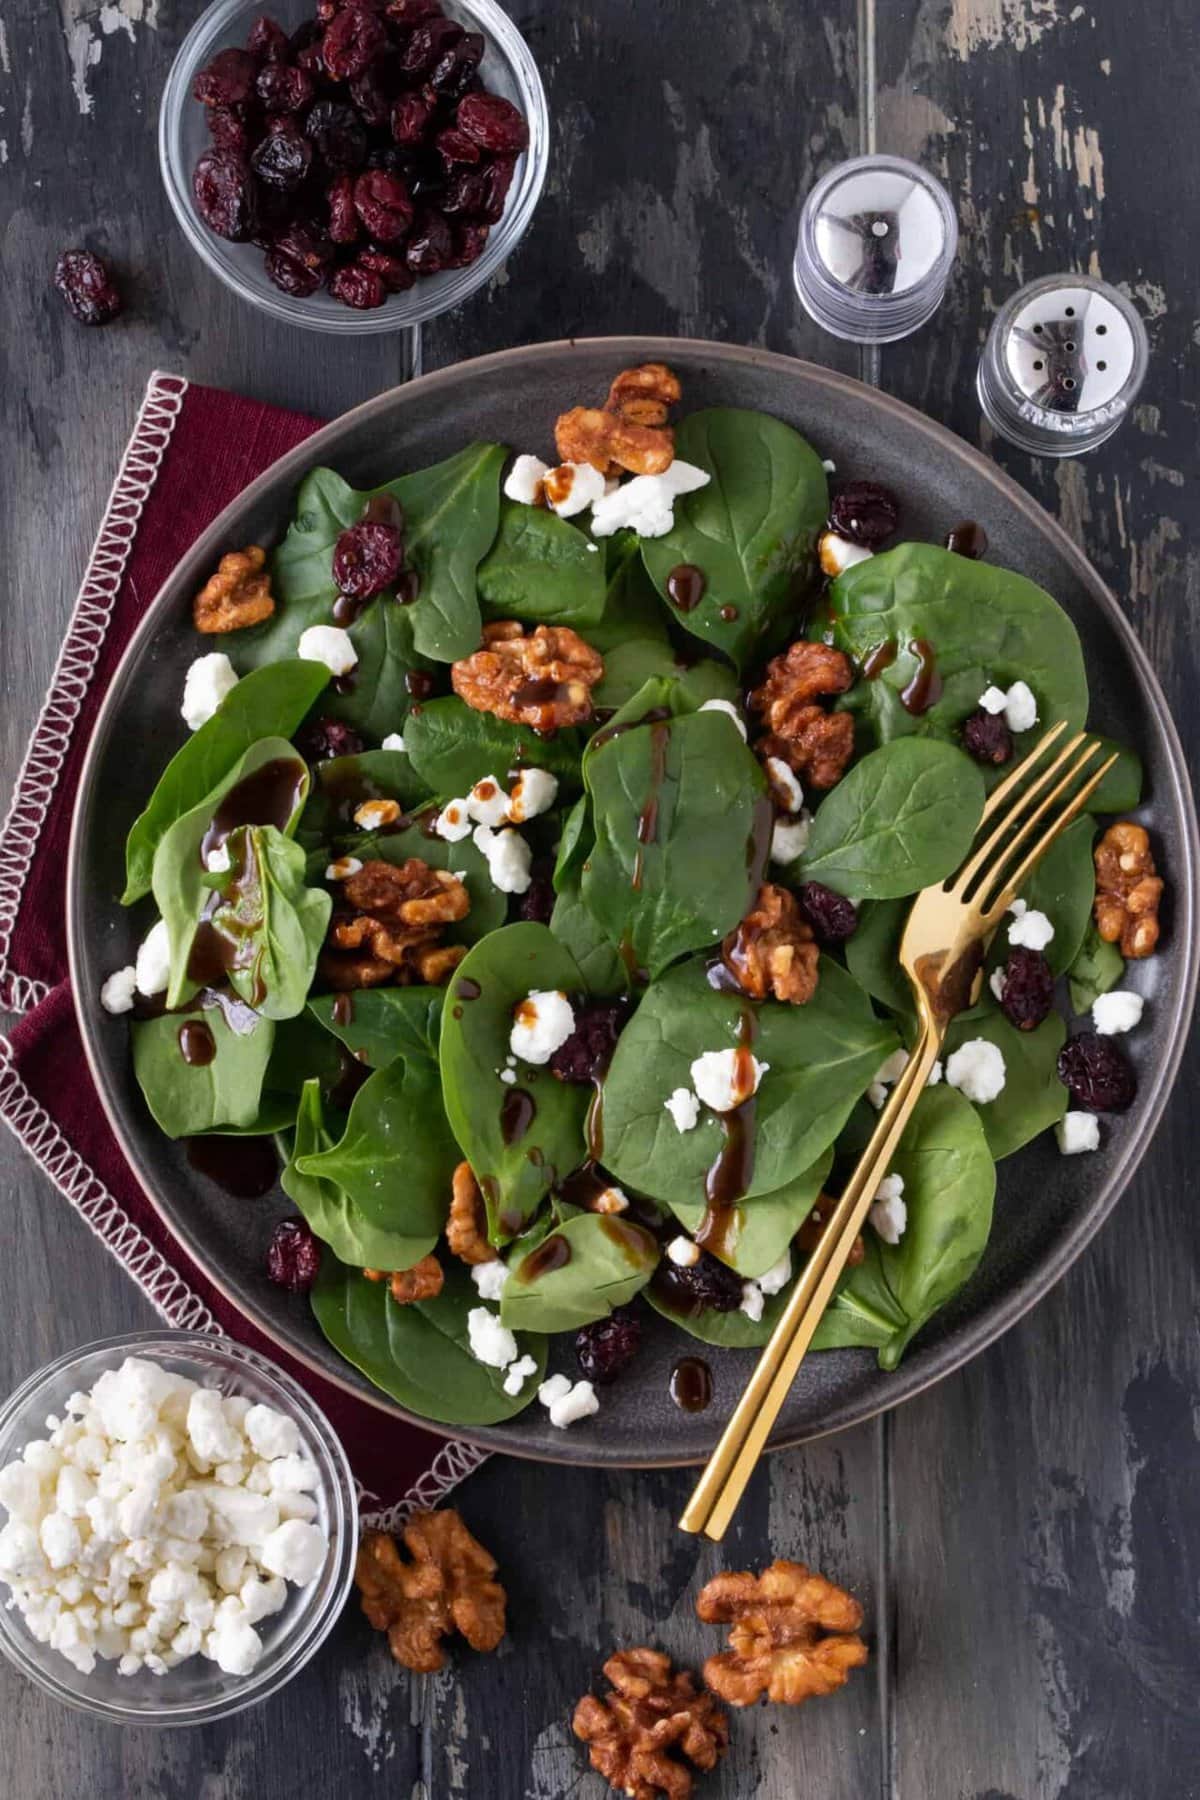 Easy Balsamic Vinaigrette Recipe for Spinach Salad (or any salad!)